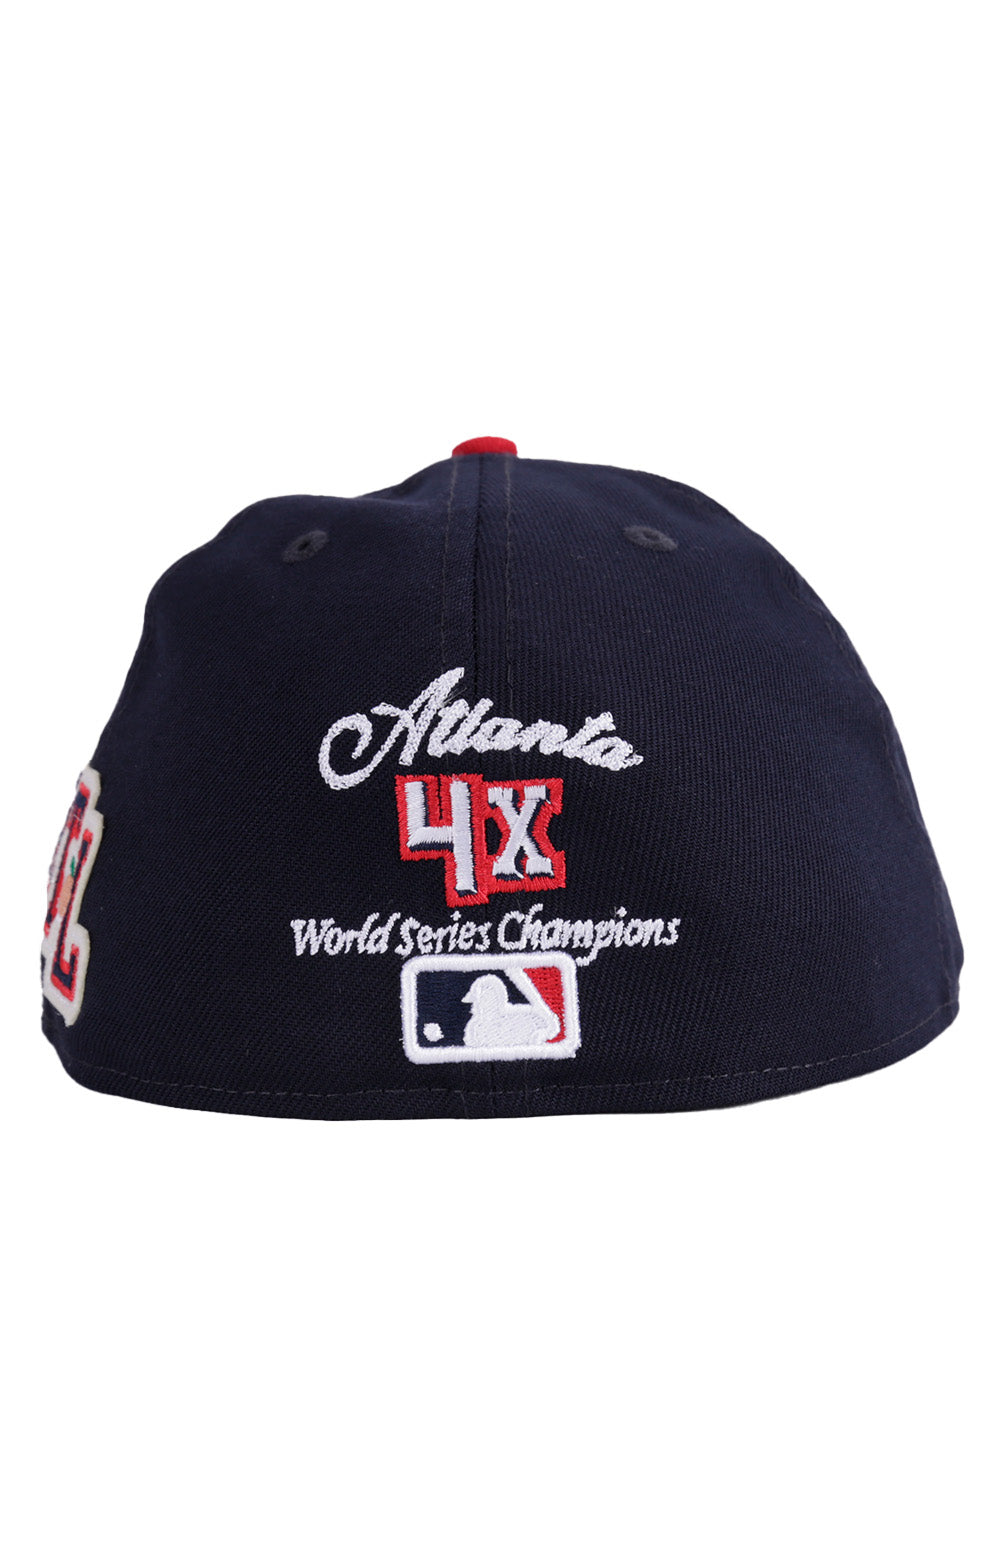 Atlanta Braves Letterman 59FIFTY Fitted Hat